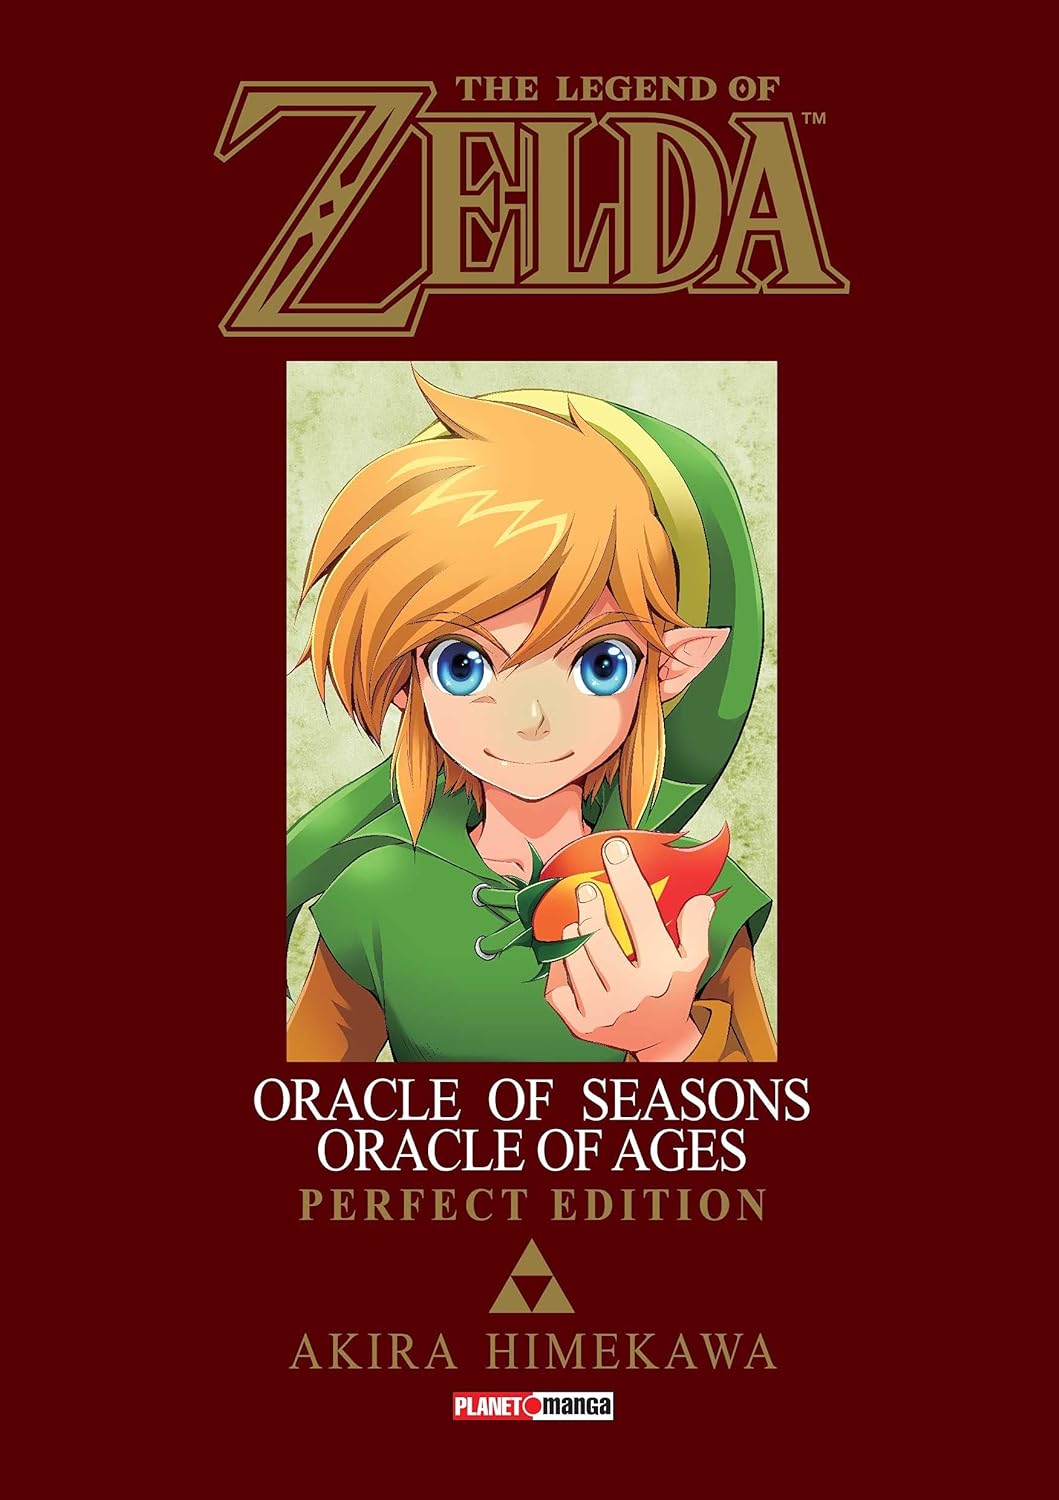 The Legend of Zelda: Oracle of Seasons cover 0